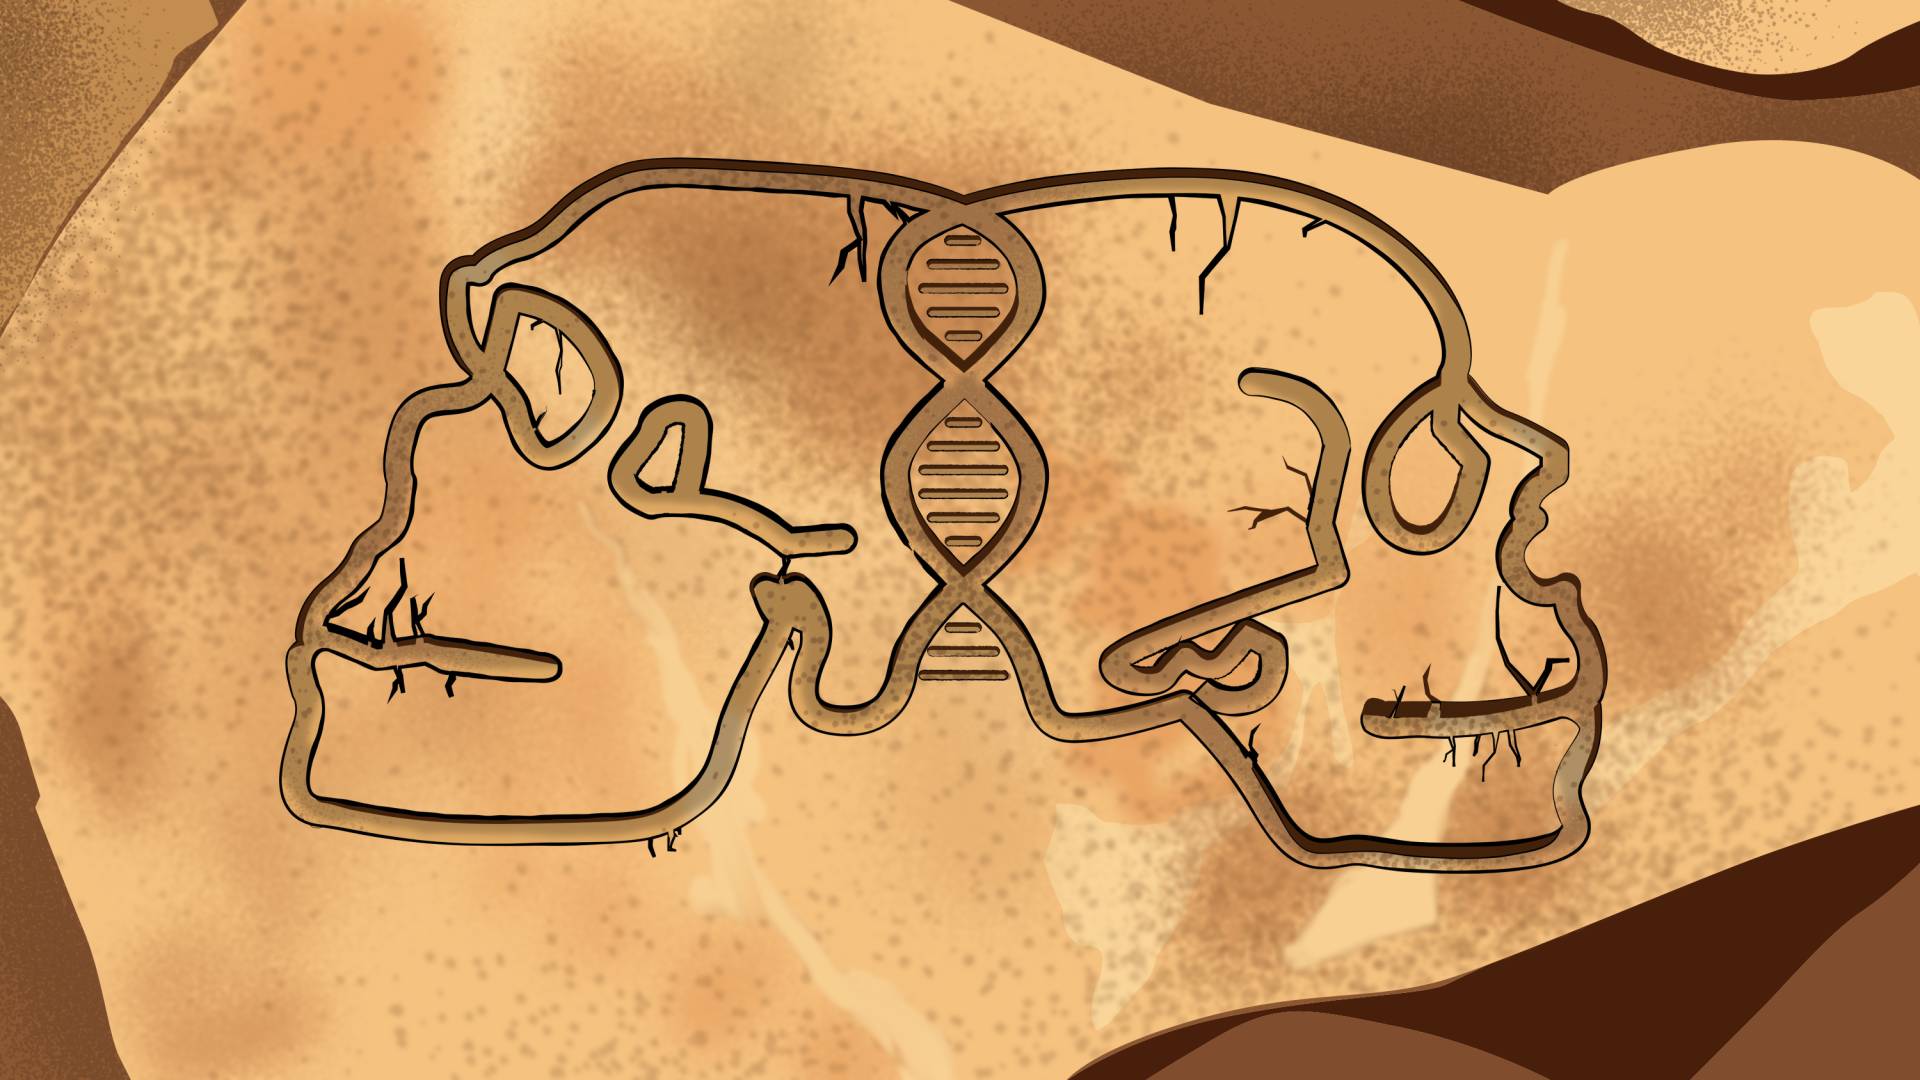 illustration of a neanderthal skull, DNA helix and humanoid skull